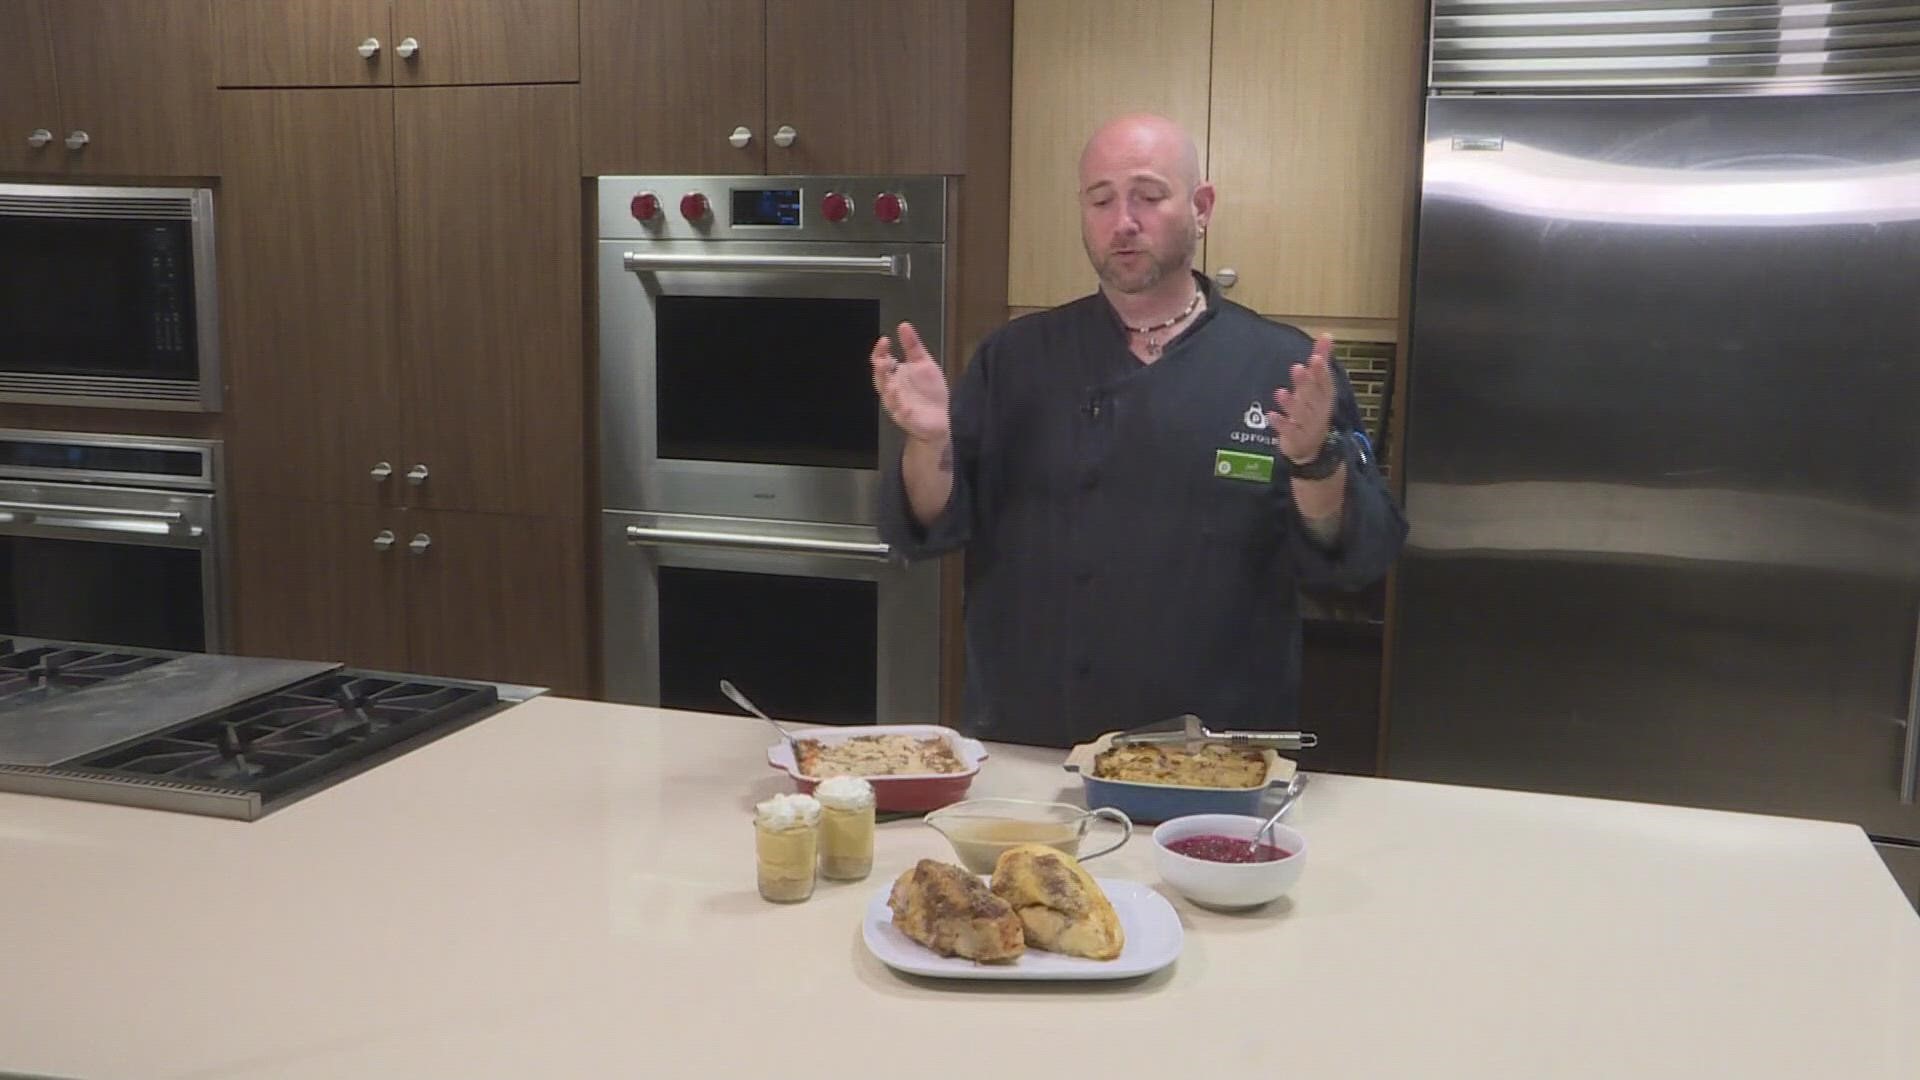 Chef Jeff Conley, the Senior Managing Chef at Publix Aprons Cooking School, shares some foolproof recipes that are sure to wow your guests.